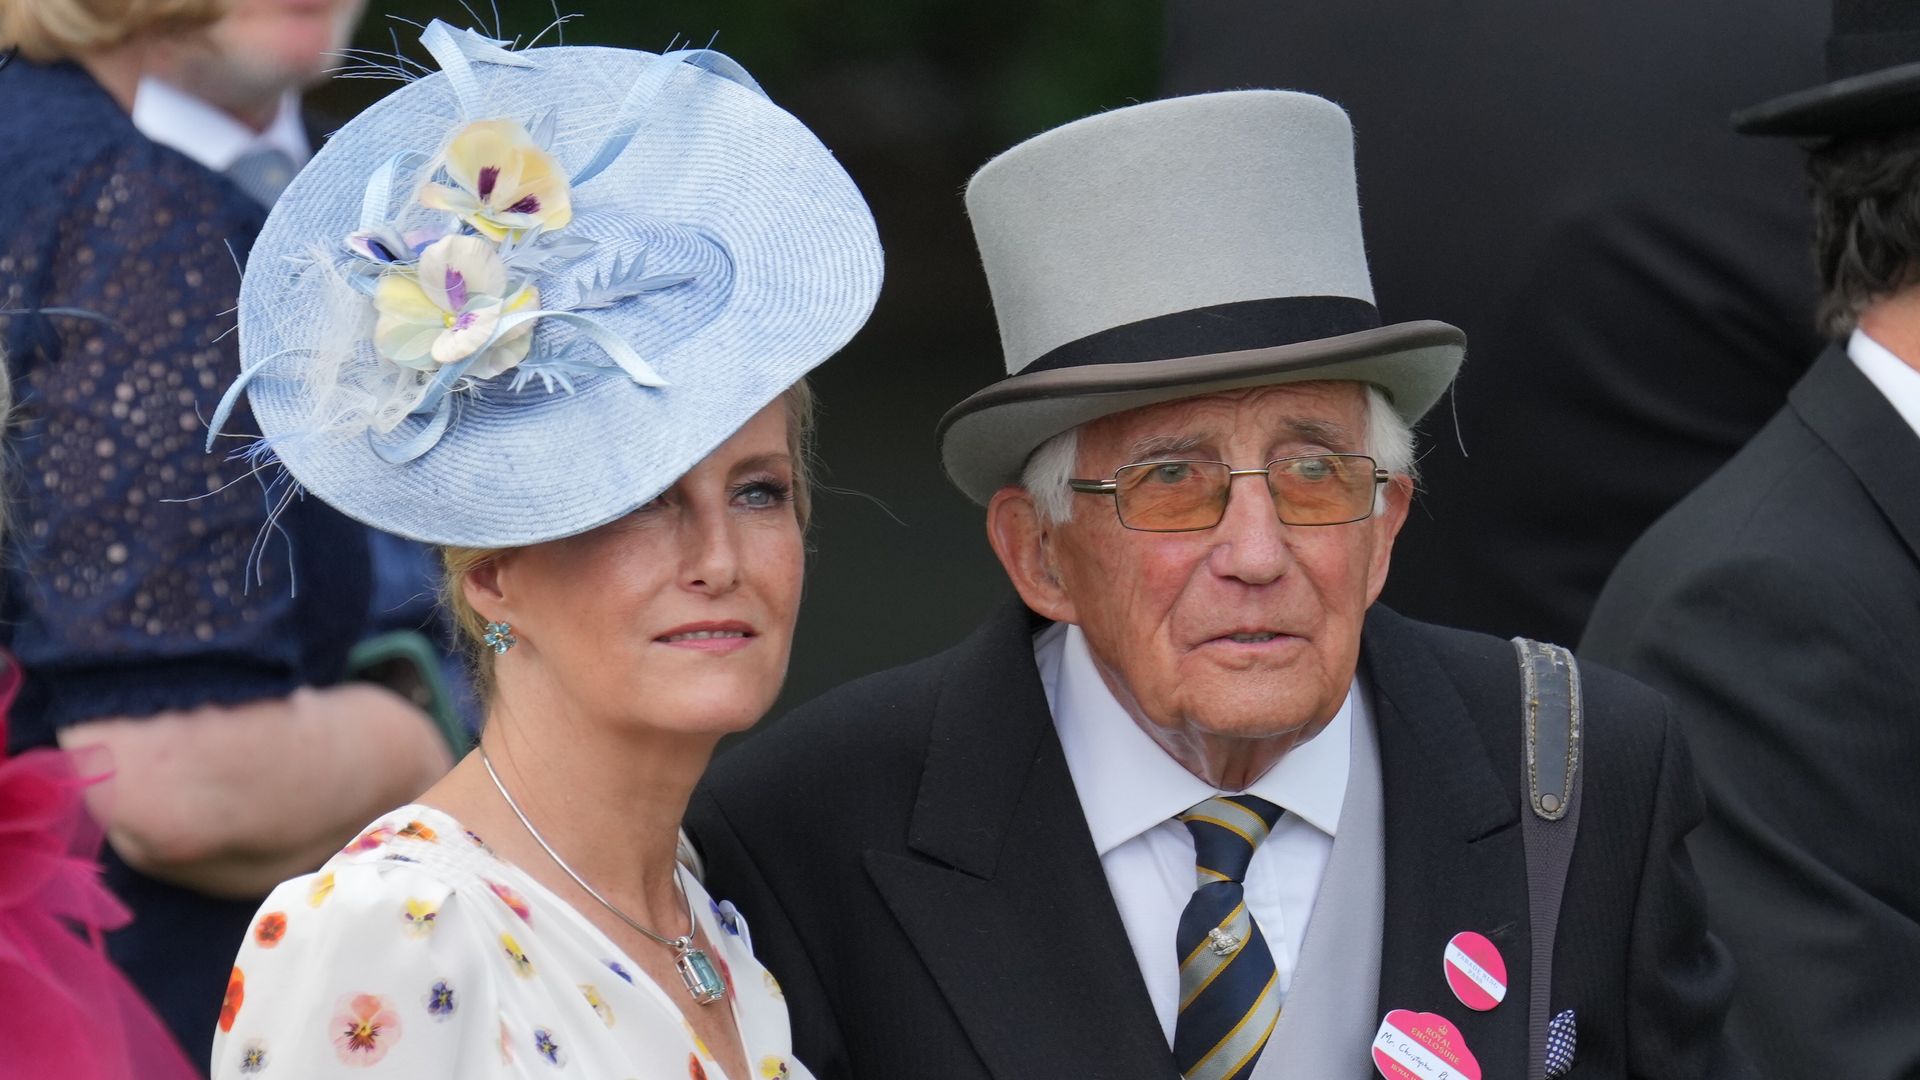 Sophie Wessex and her 92-year-old dad attending ascot.